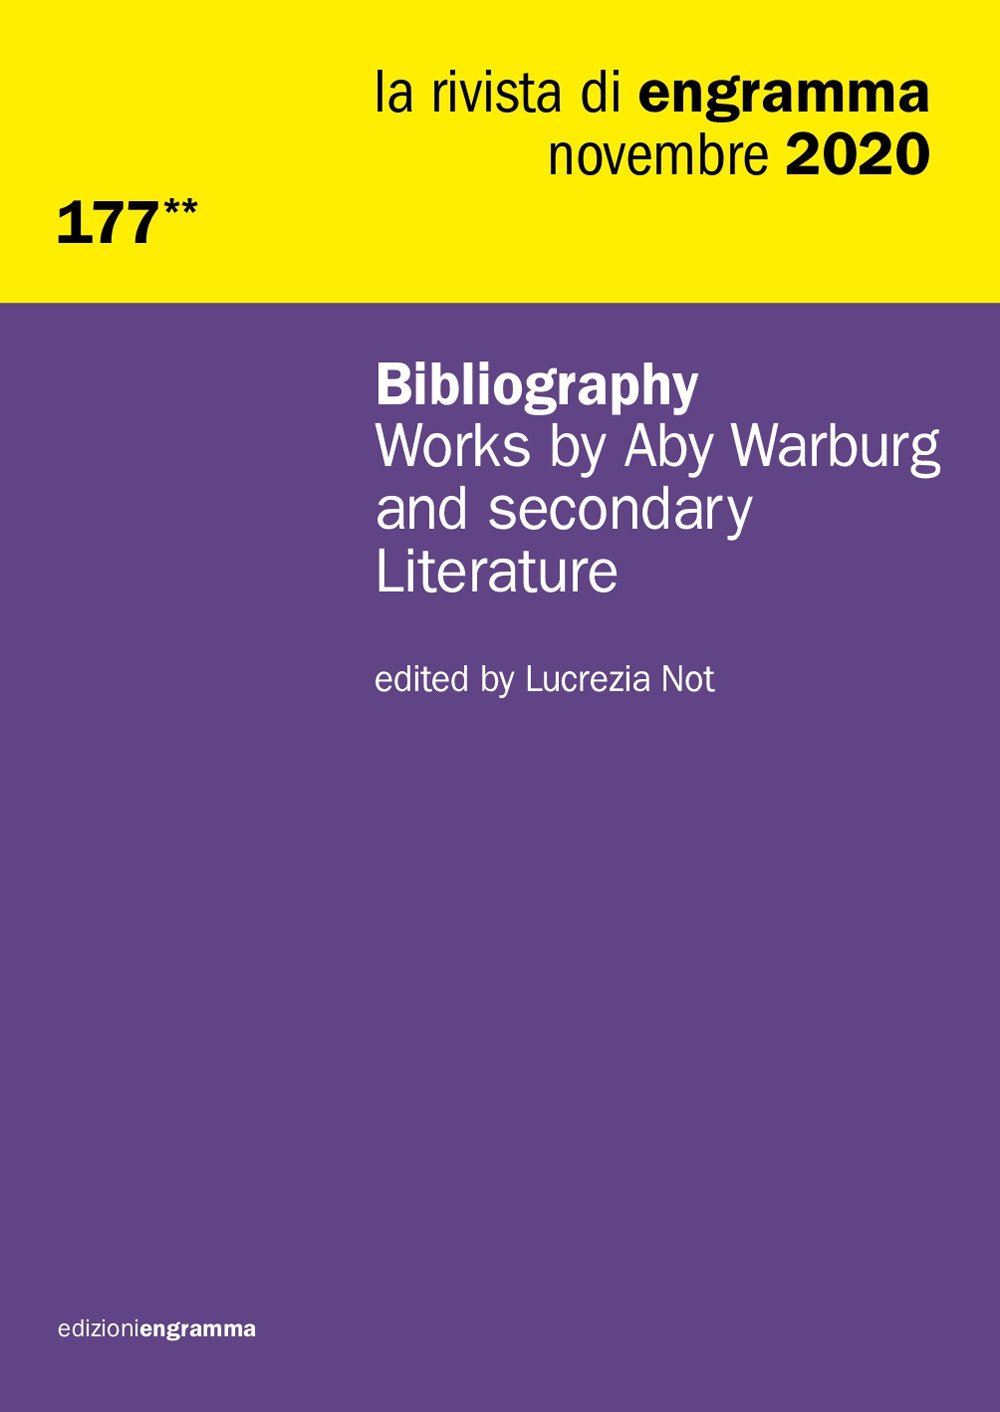 La rivista di Engramma. Vol. 177: Bibliography works by Aby Warburg and secondary literature